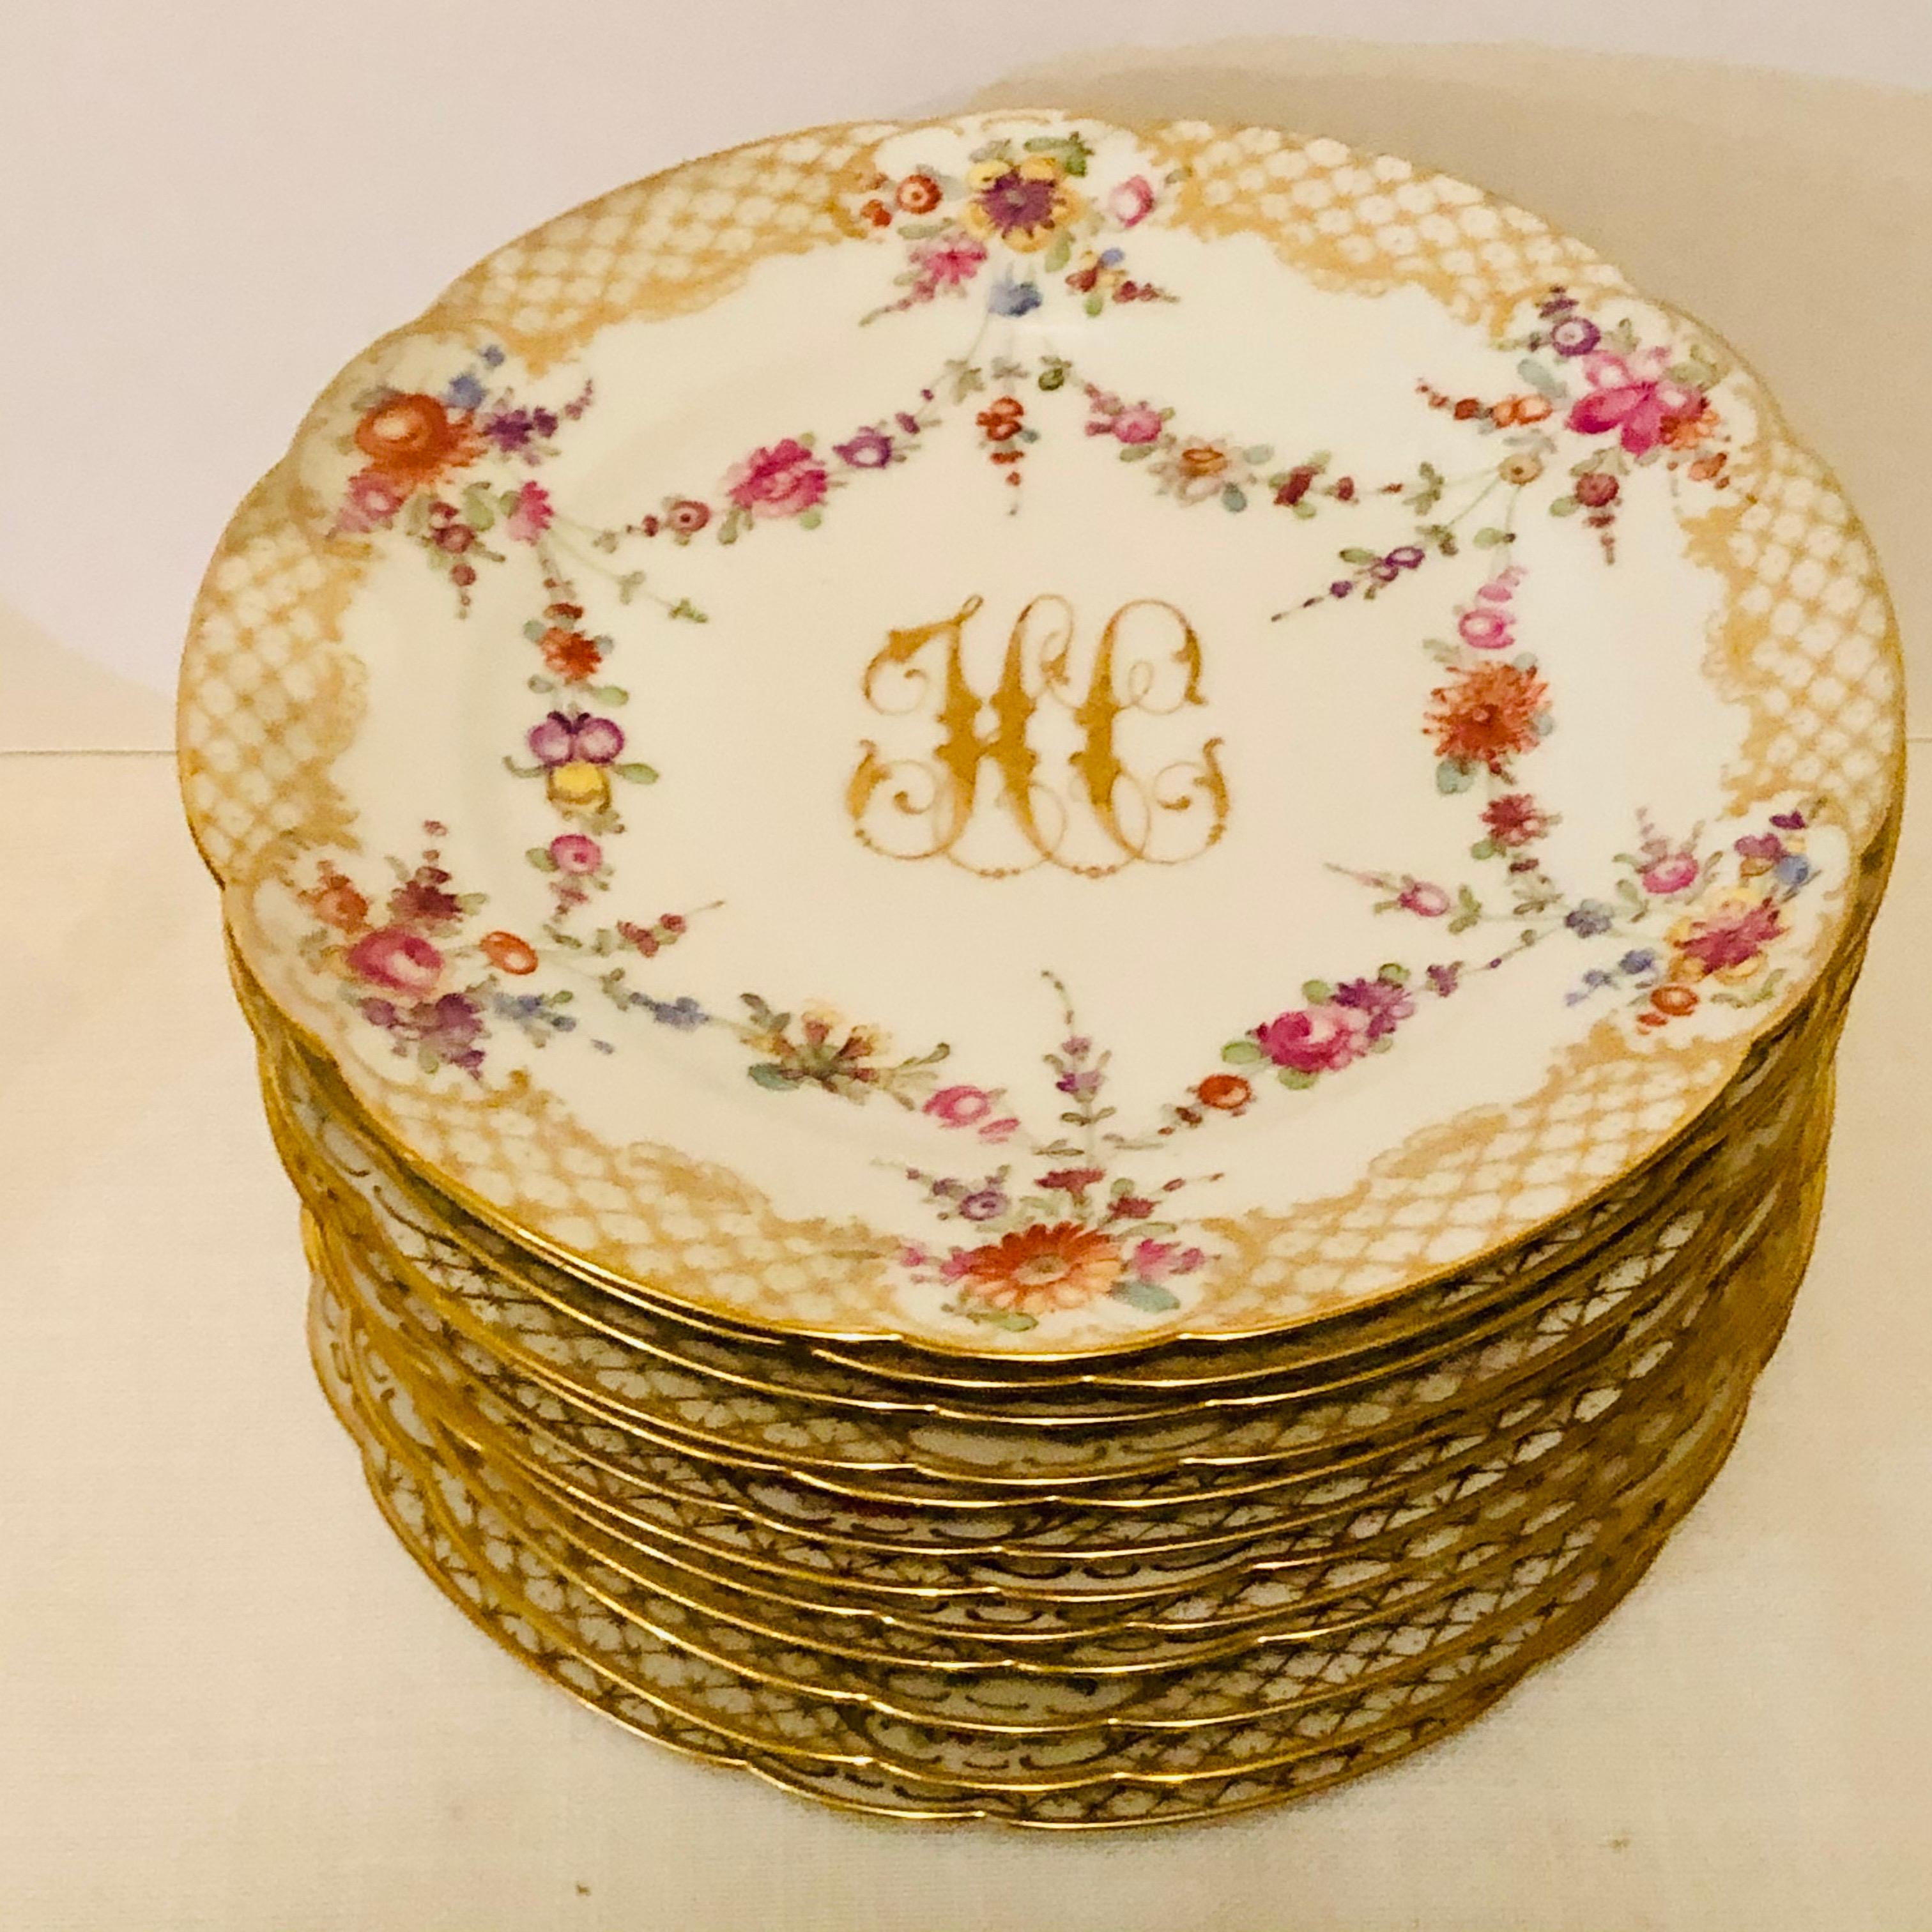 This is a lovely set of twelve Ambrosius Lamm dessert plates. Each plate is painted with different flowers. There is a central raised gold monogram, which is surrounded by a ribbon of flowers. The plates have a border of cross hatched gold and white